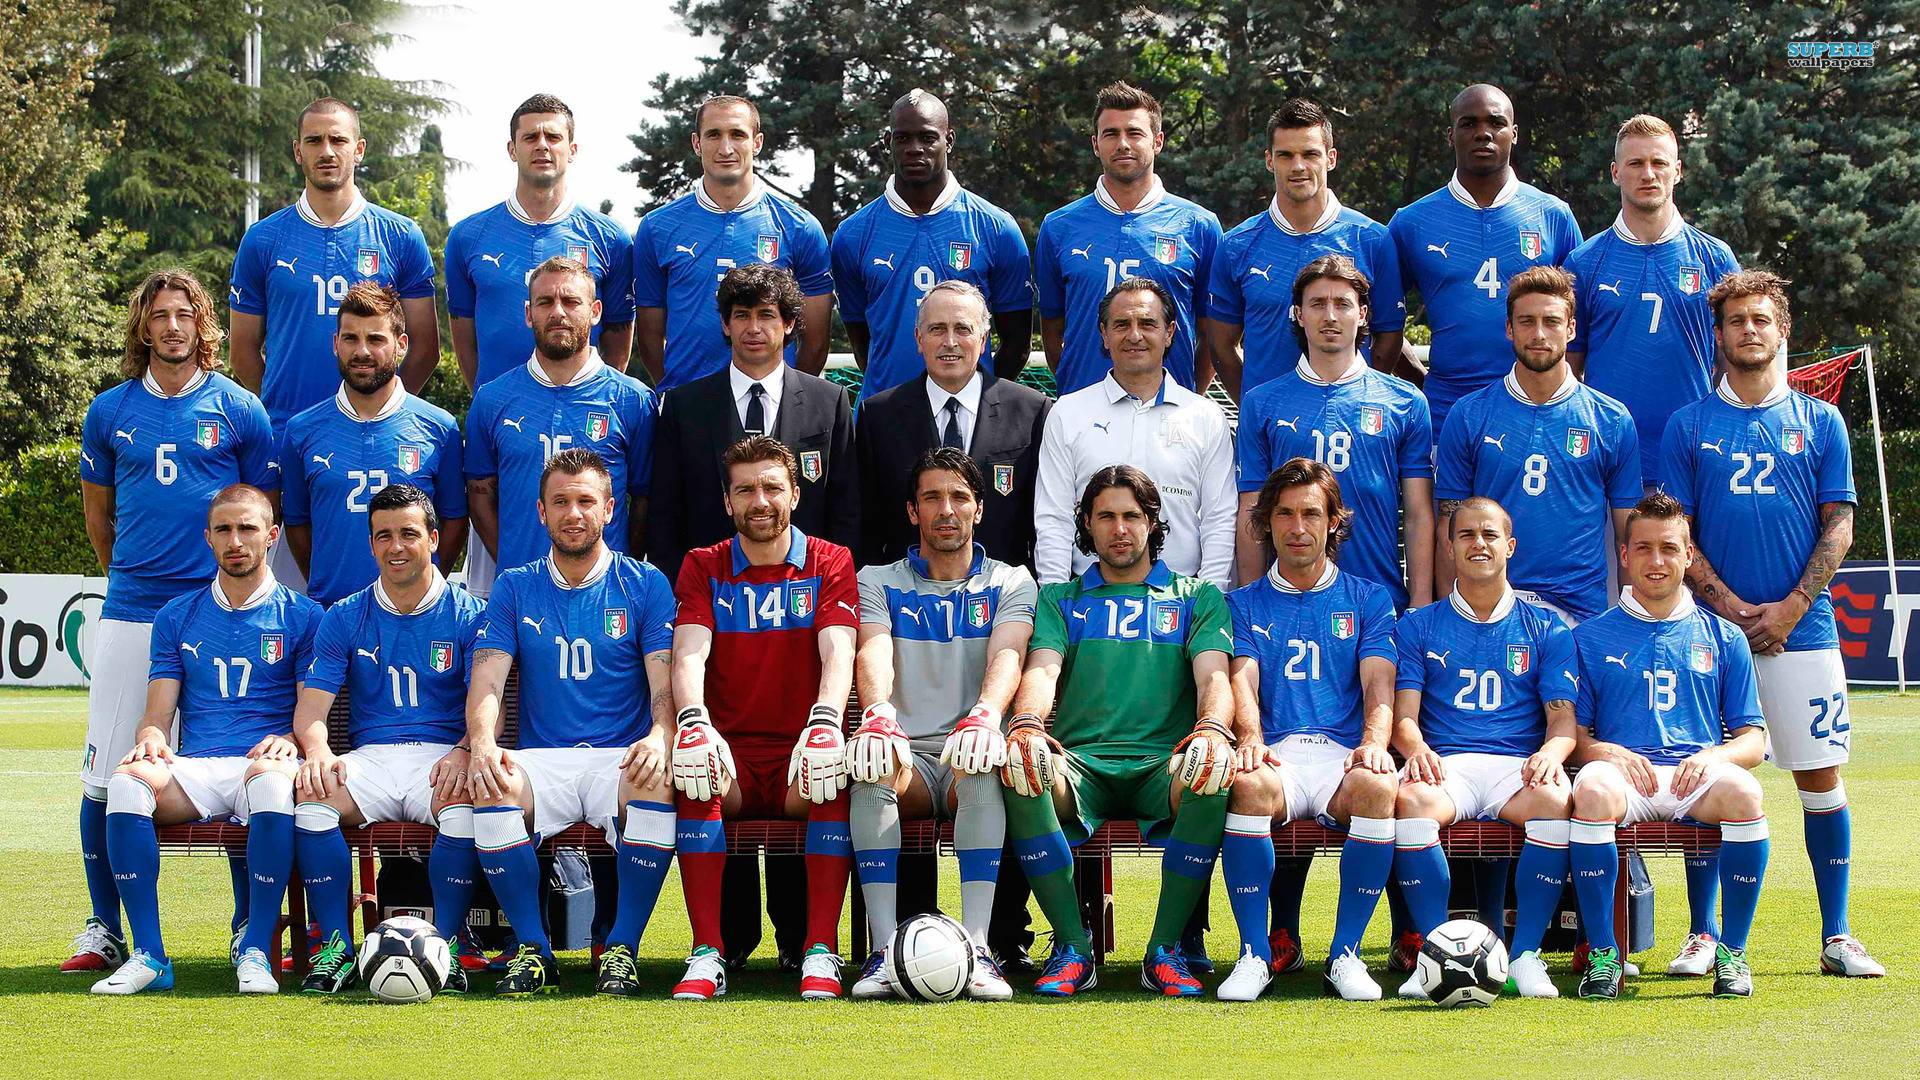 Italy national football team wallpaper and Theme. All for Windows